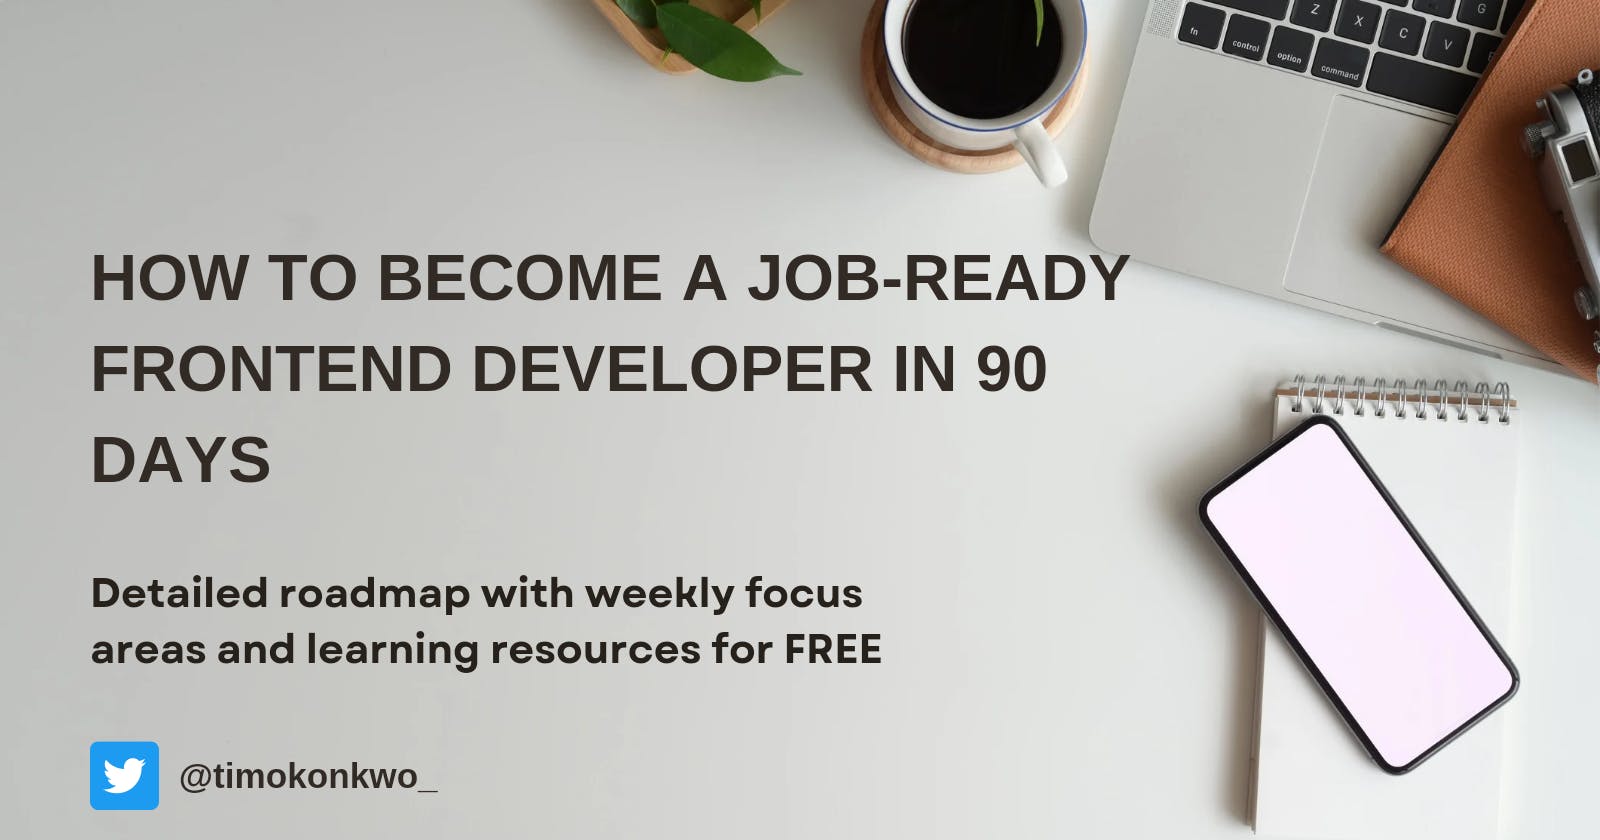 How To Become A Job-Ready Frontend Web Developer in 90 Days With 82% Chance Of Getting A Job (With FREE Resources)